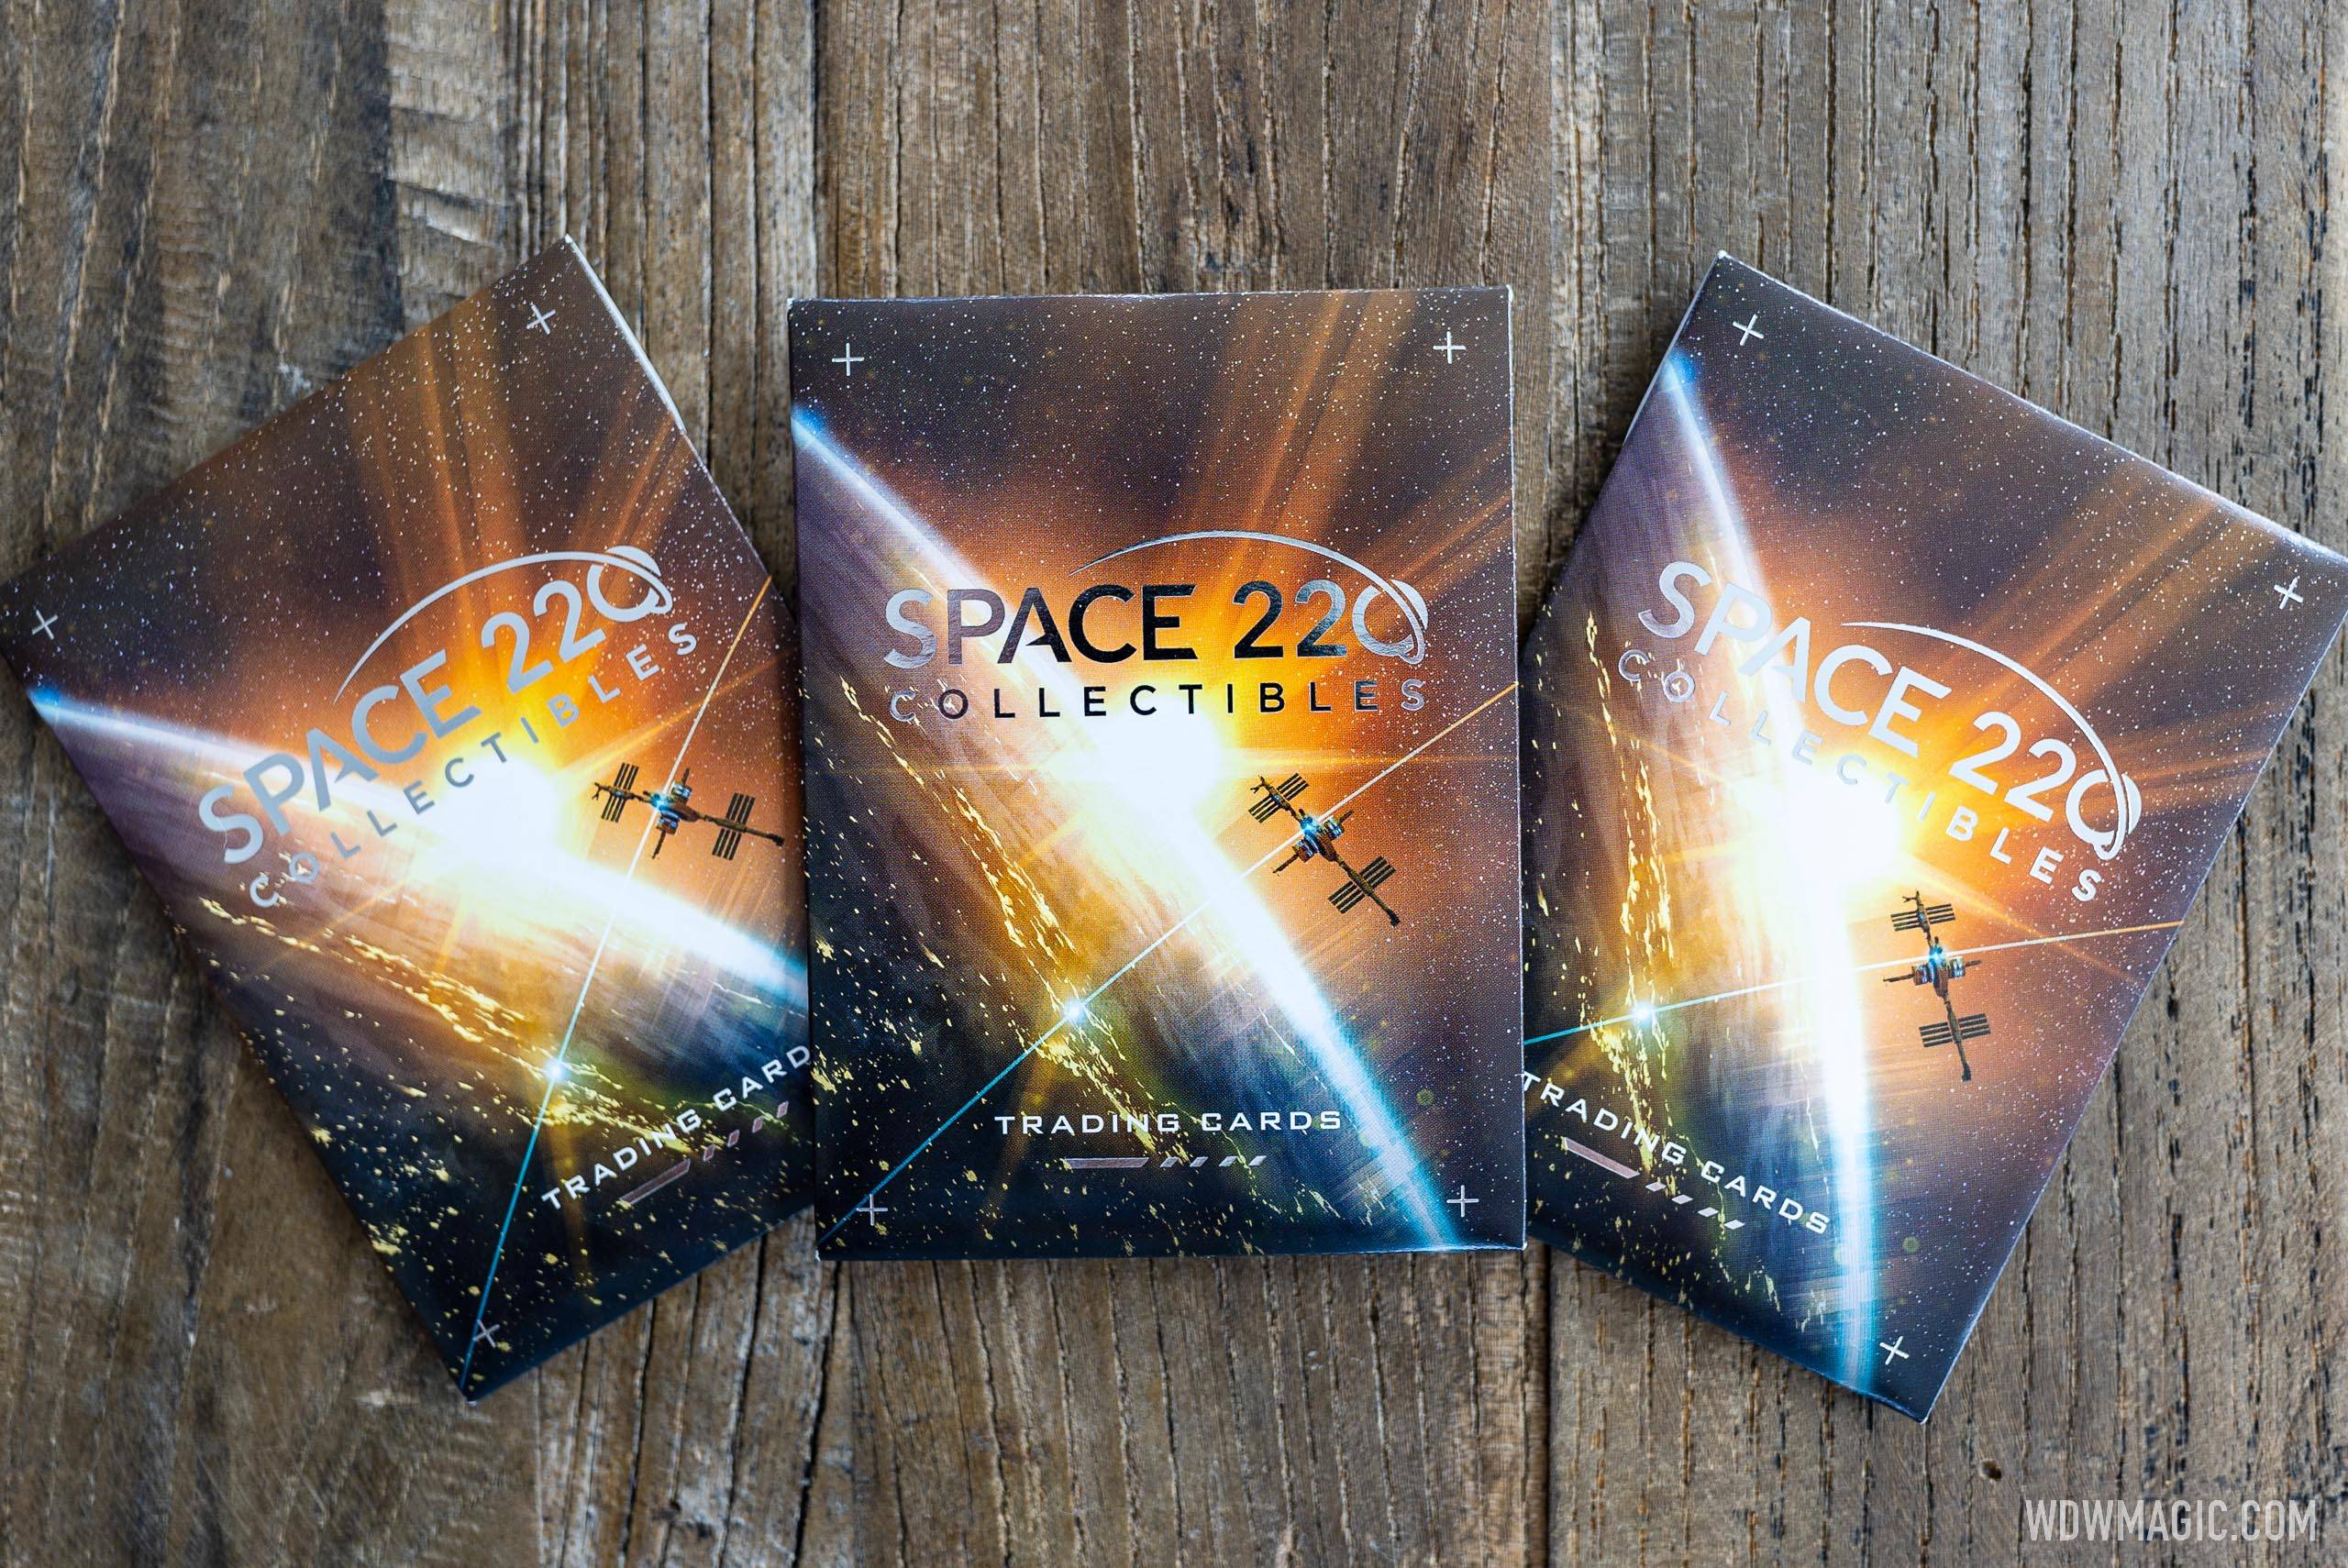 Space 220 Trading Card packs each contain five cards